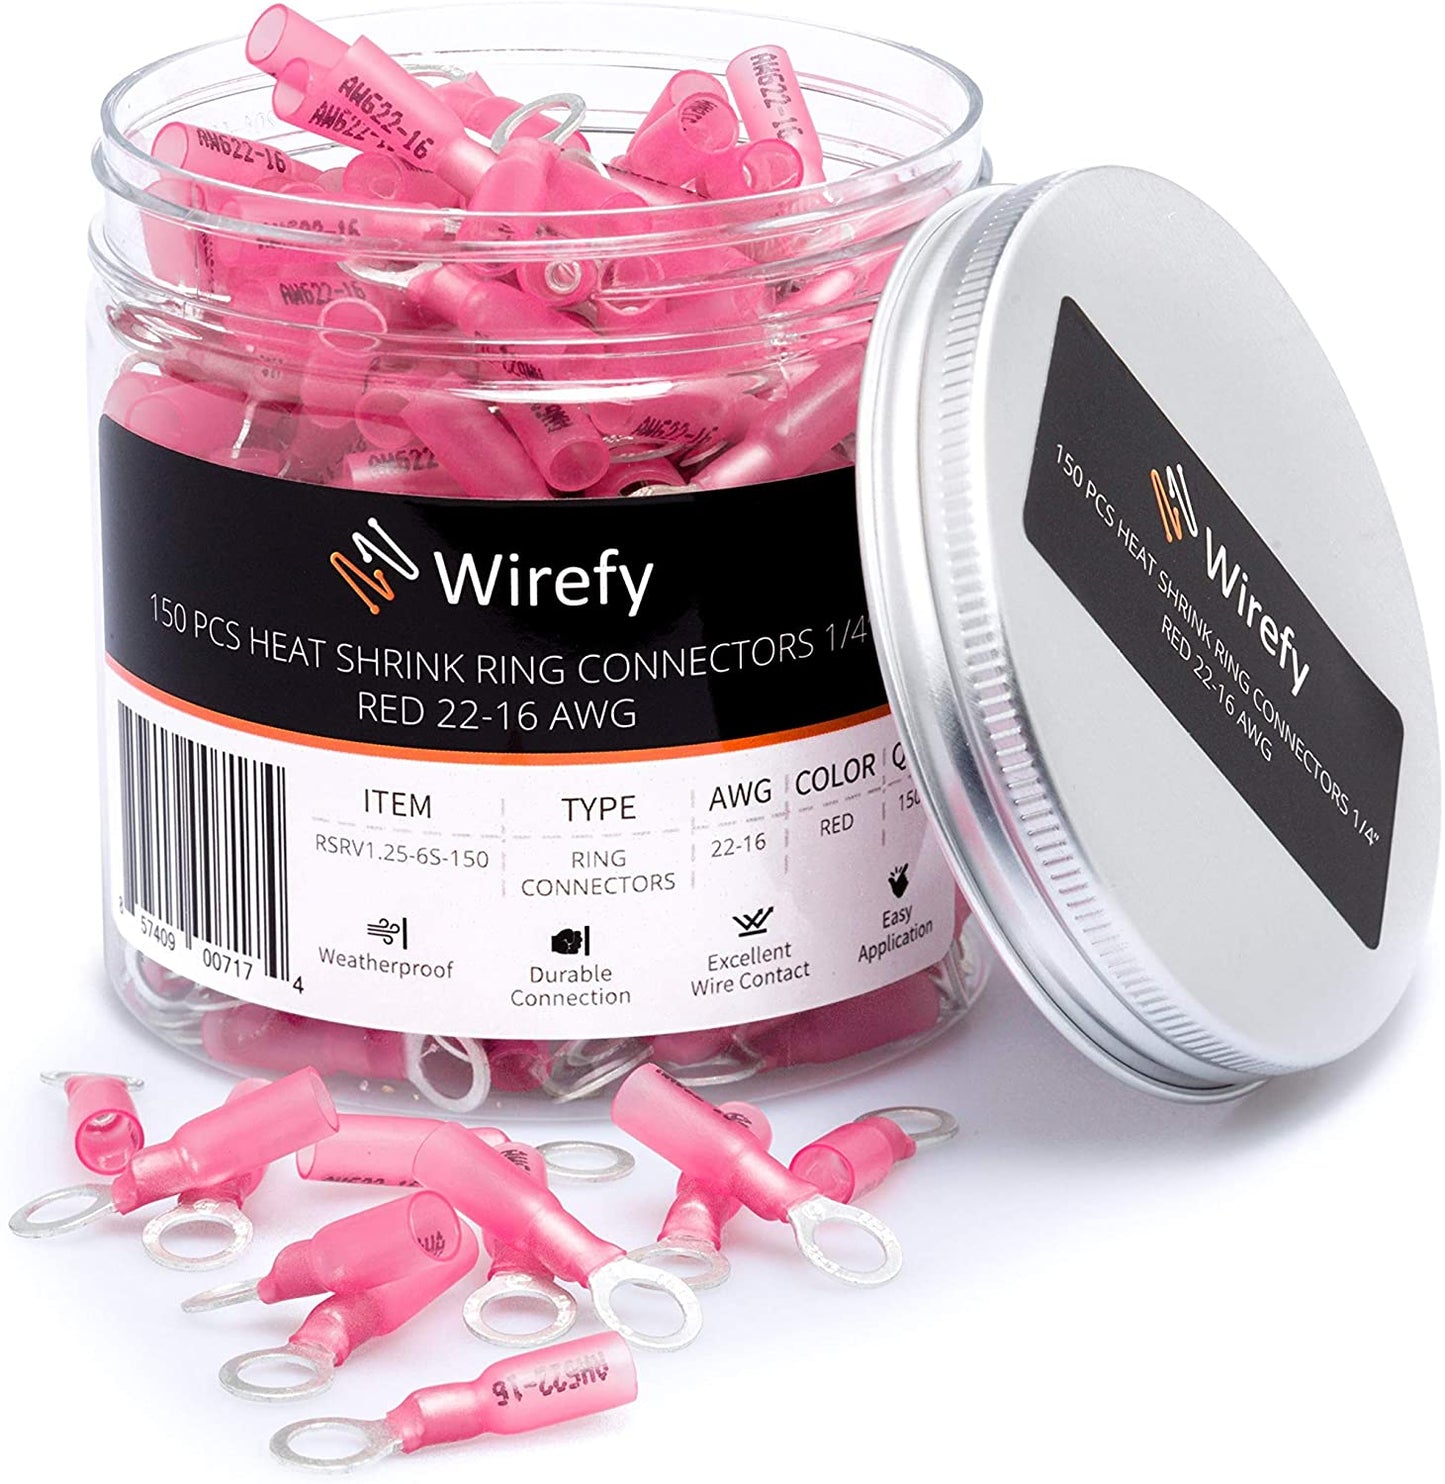 Wirefy 150 PCS Ring Terminals 1/4" Red 22-16 AWG - Heat Shrink Crimp Solderless Wire Connector Kit